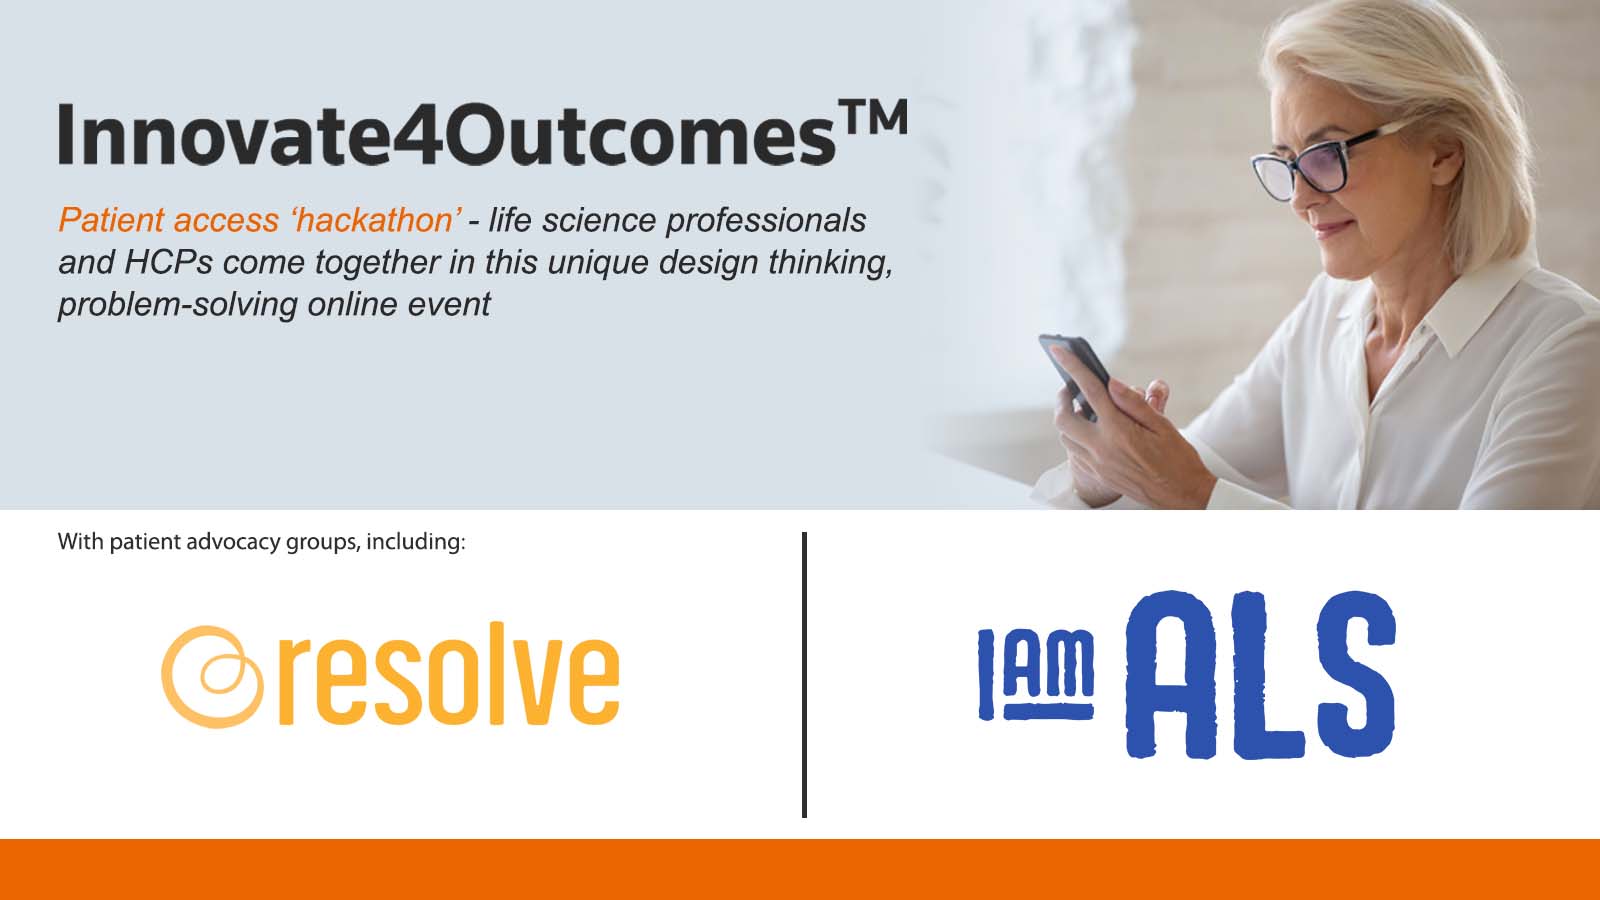 Innovate4Outcomes in partnership with resolve and IamALS